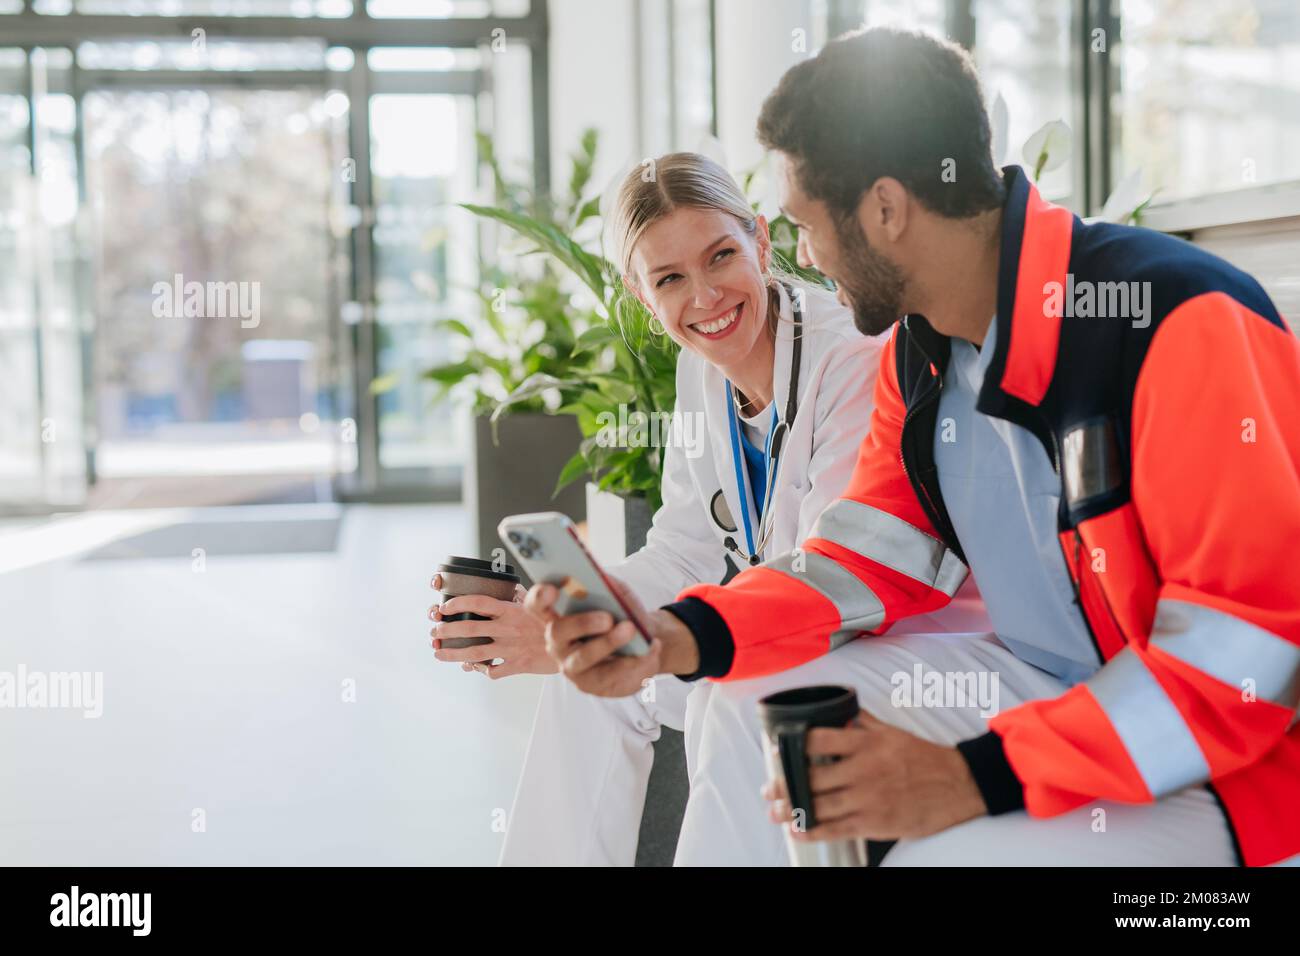 Rescuer having break and talking with doctor colleague, at hospital corridor. Stock Photo